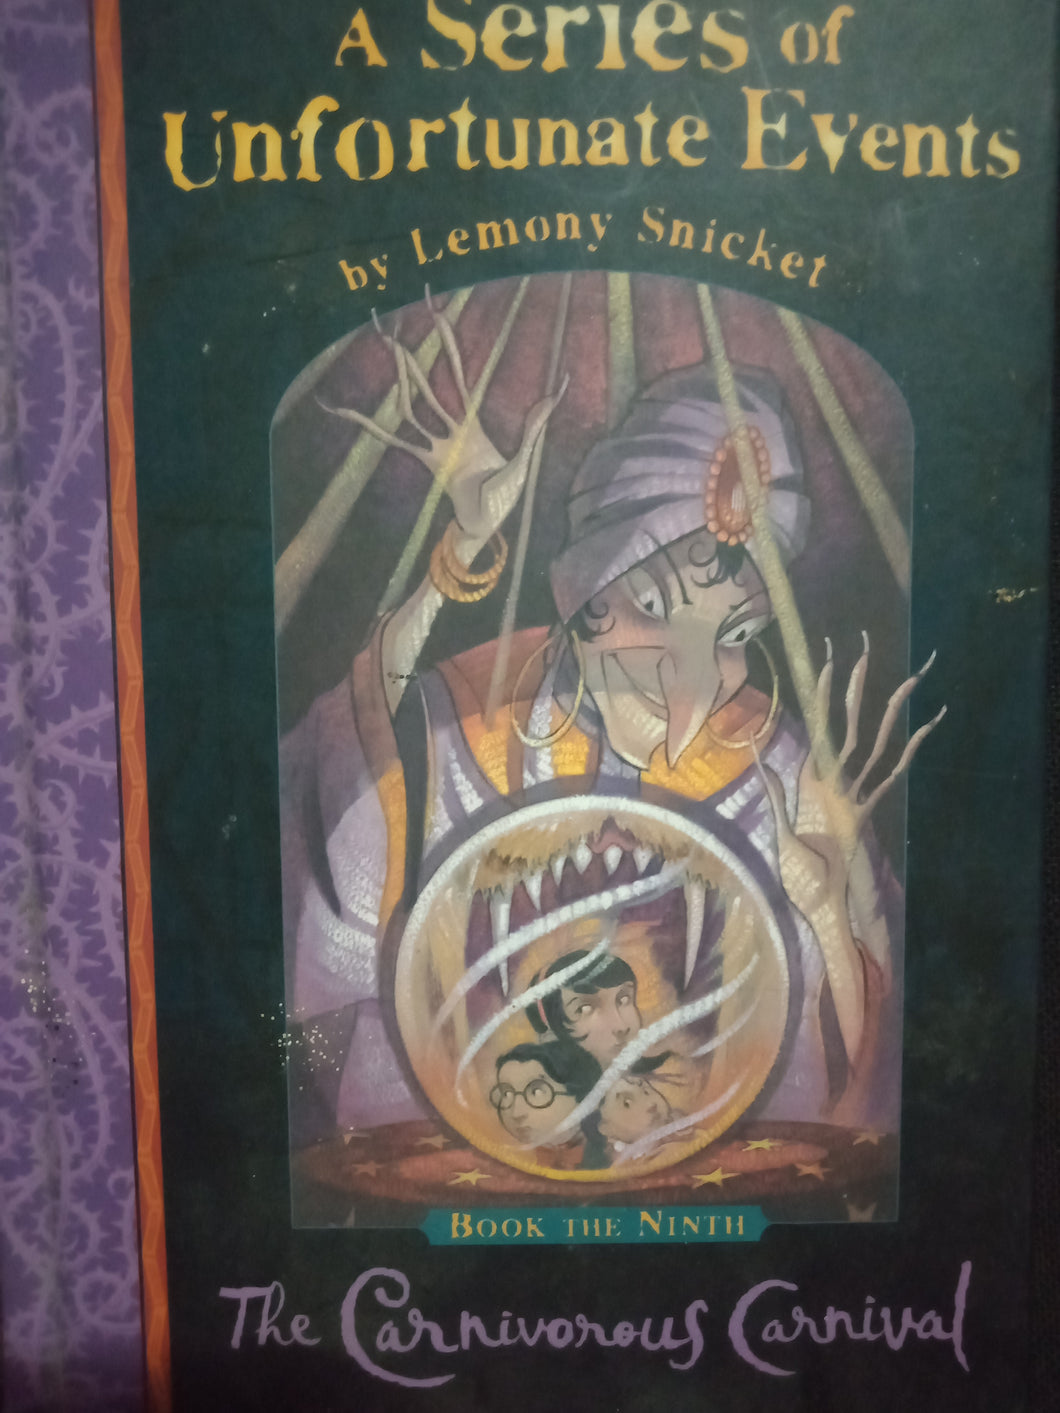 A Series of Unfortunate Events The Cornivorous Carnival By Lemony Snicket